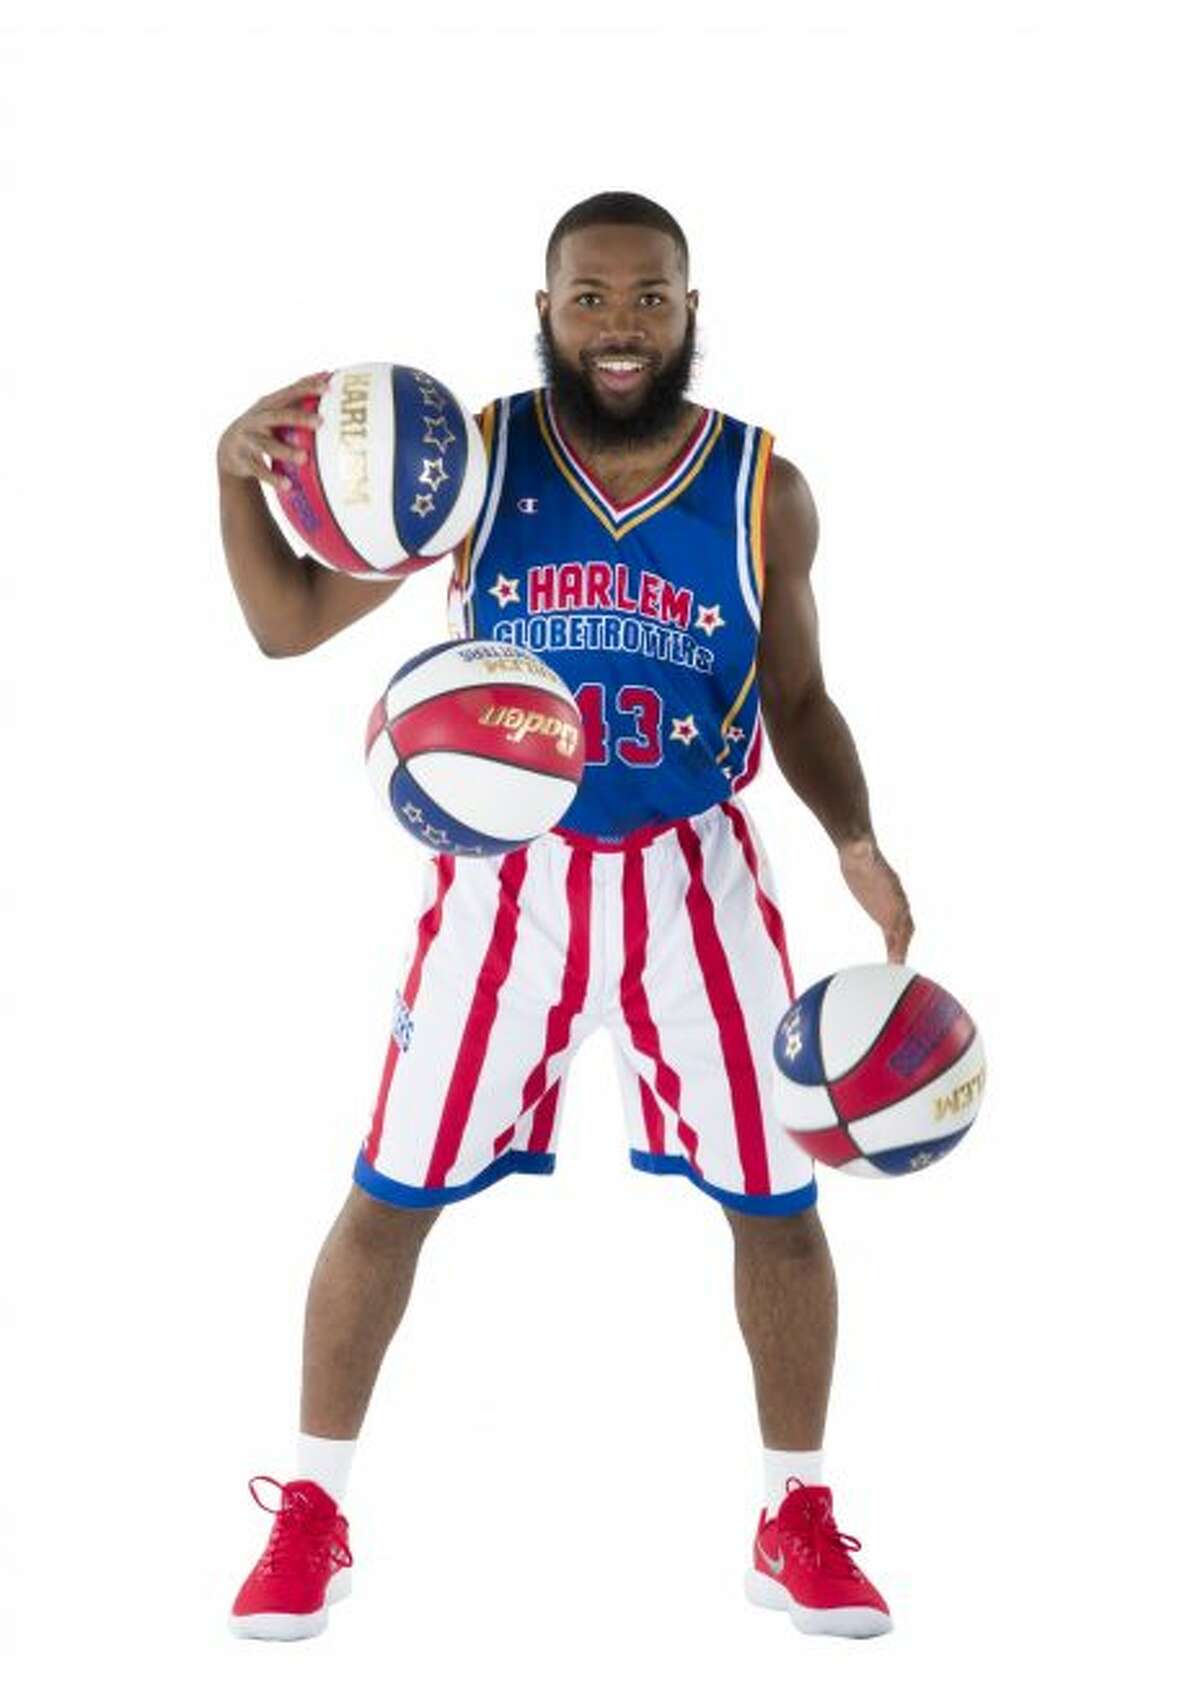 Speedy Artis and the Globetrotters are ready to perform on Sunday at Wink Arena. (Couresy photo)